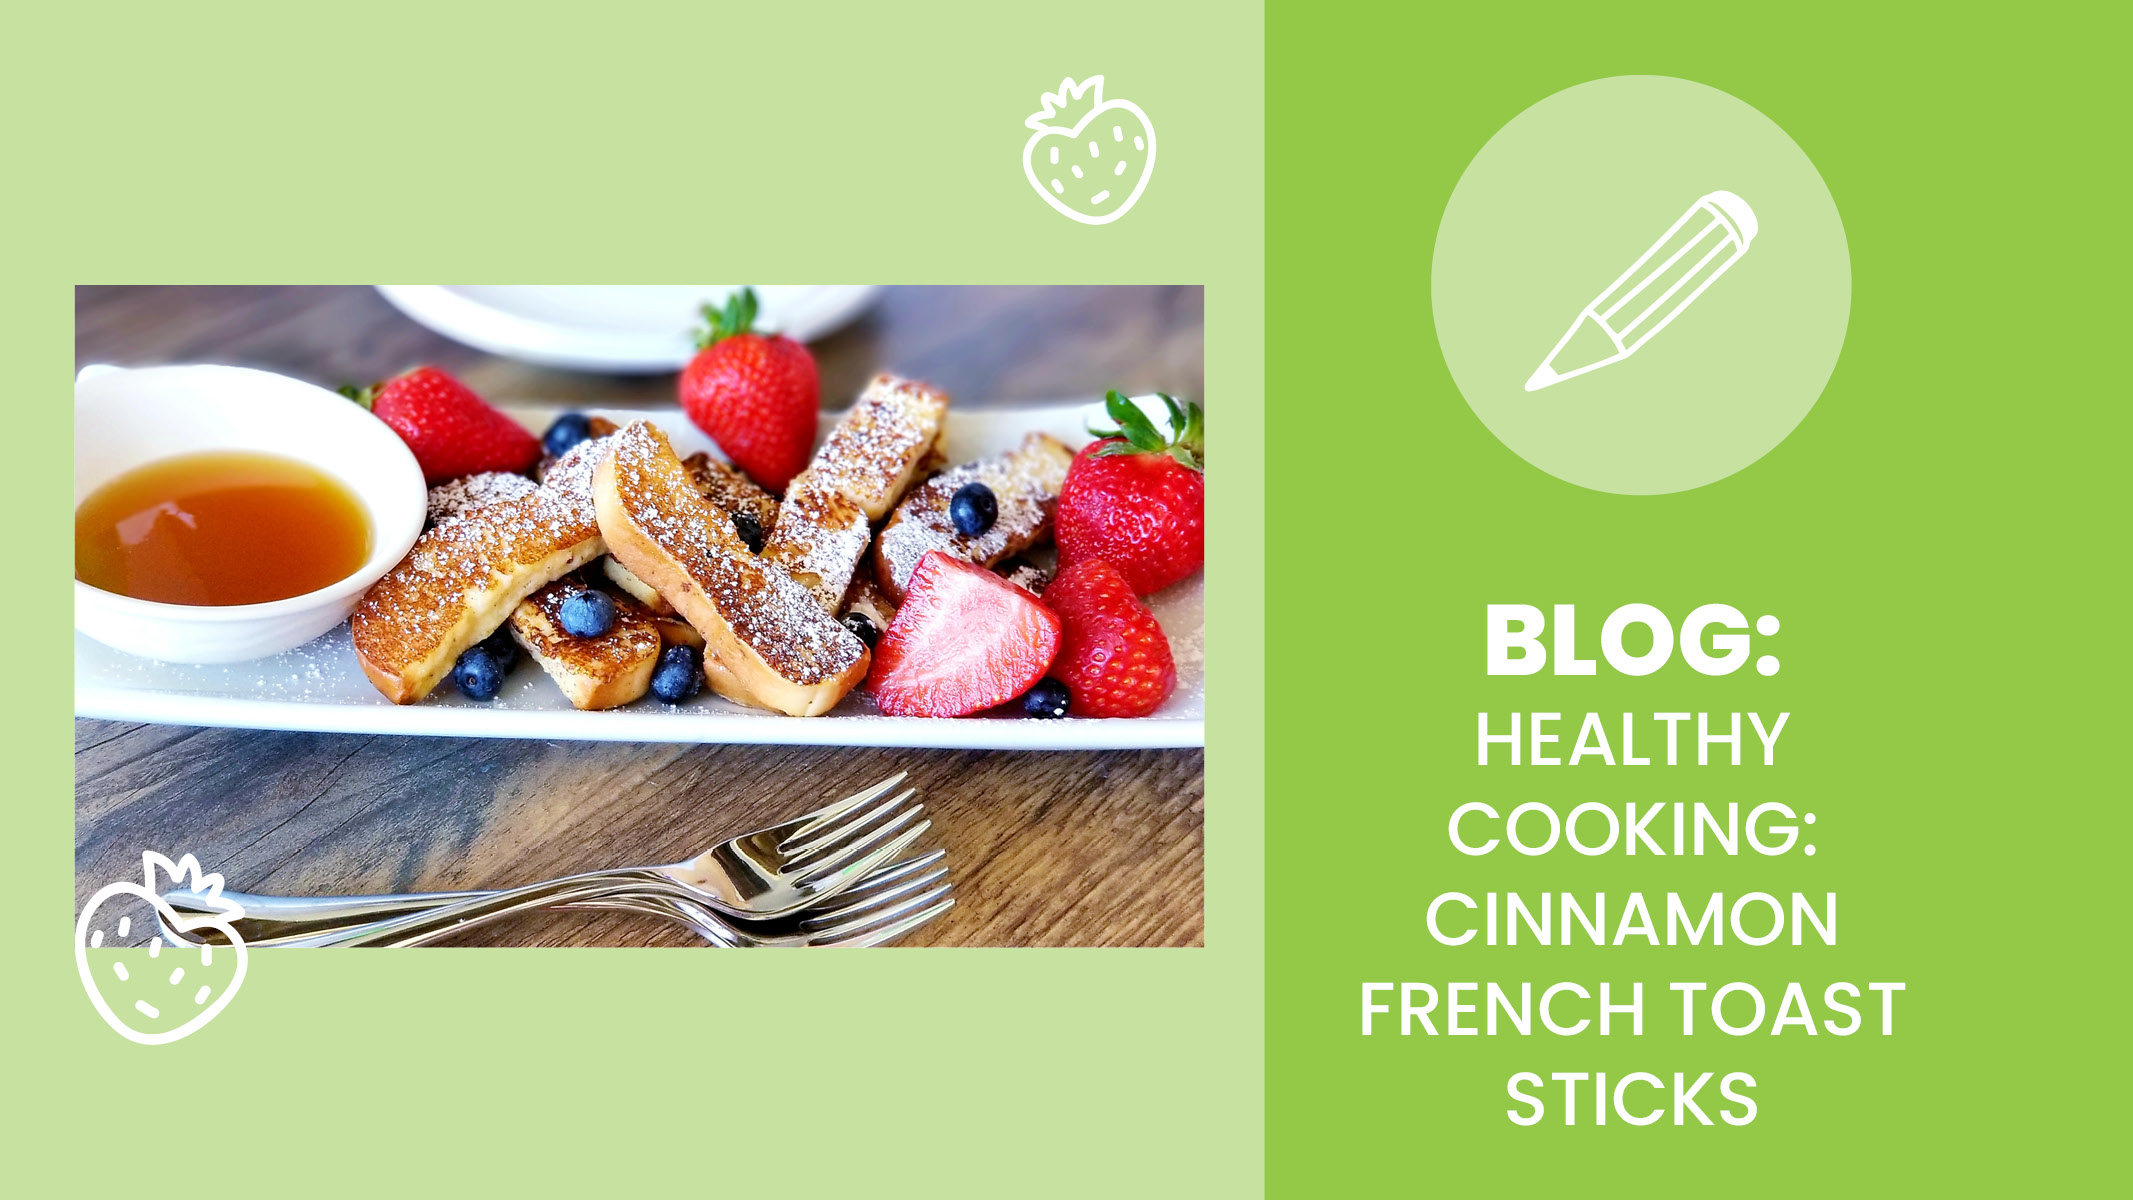 Healthy breakfast made with French toast sticks and fruit